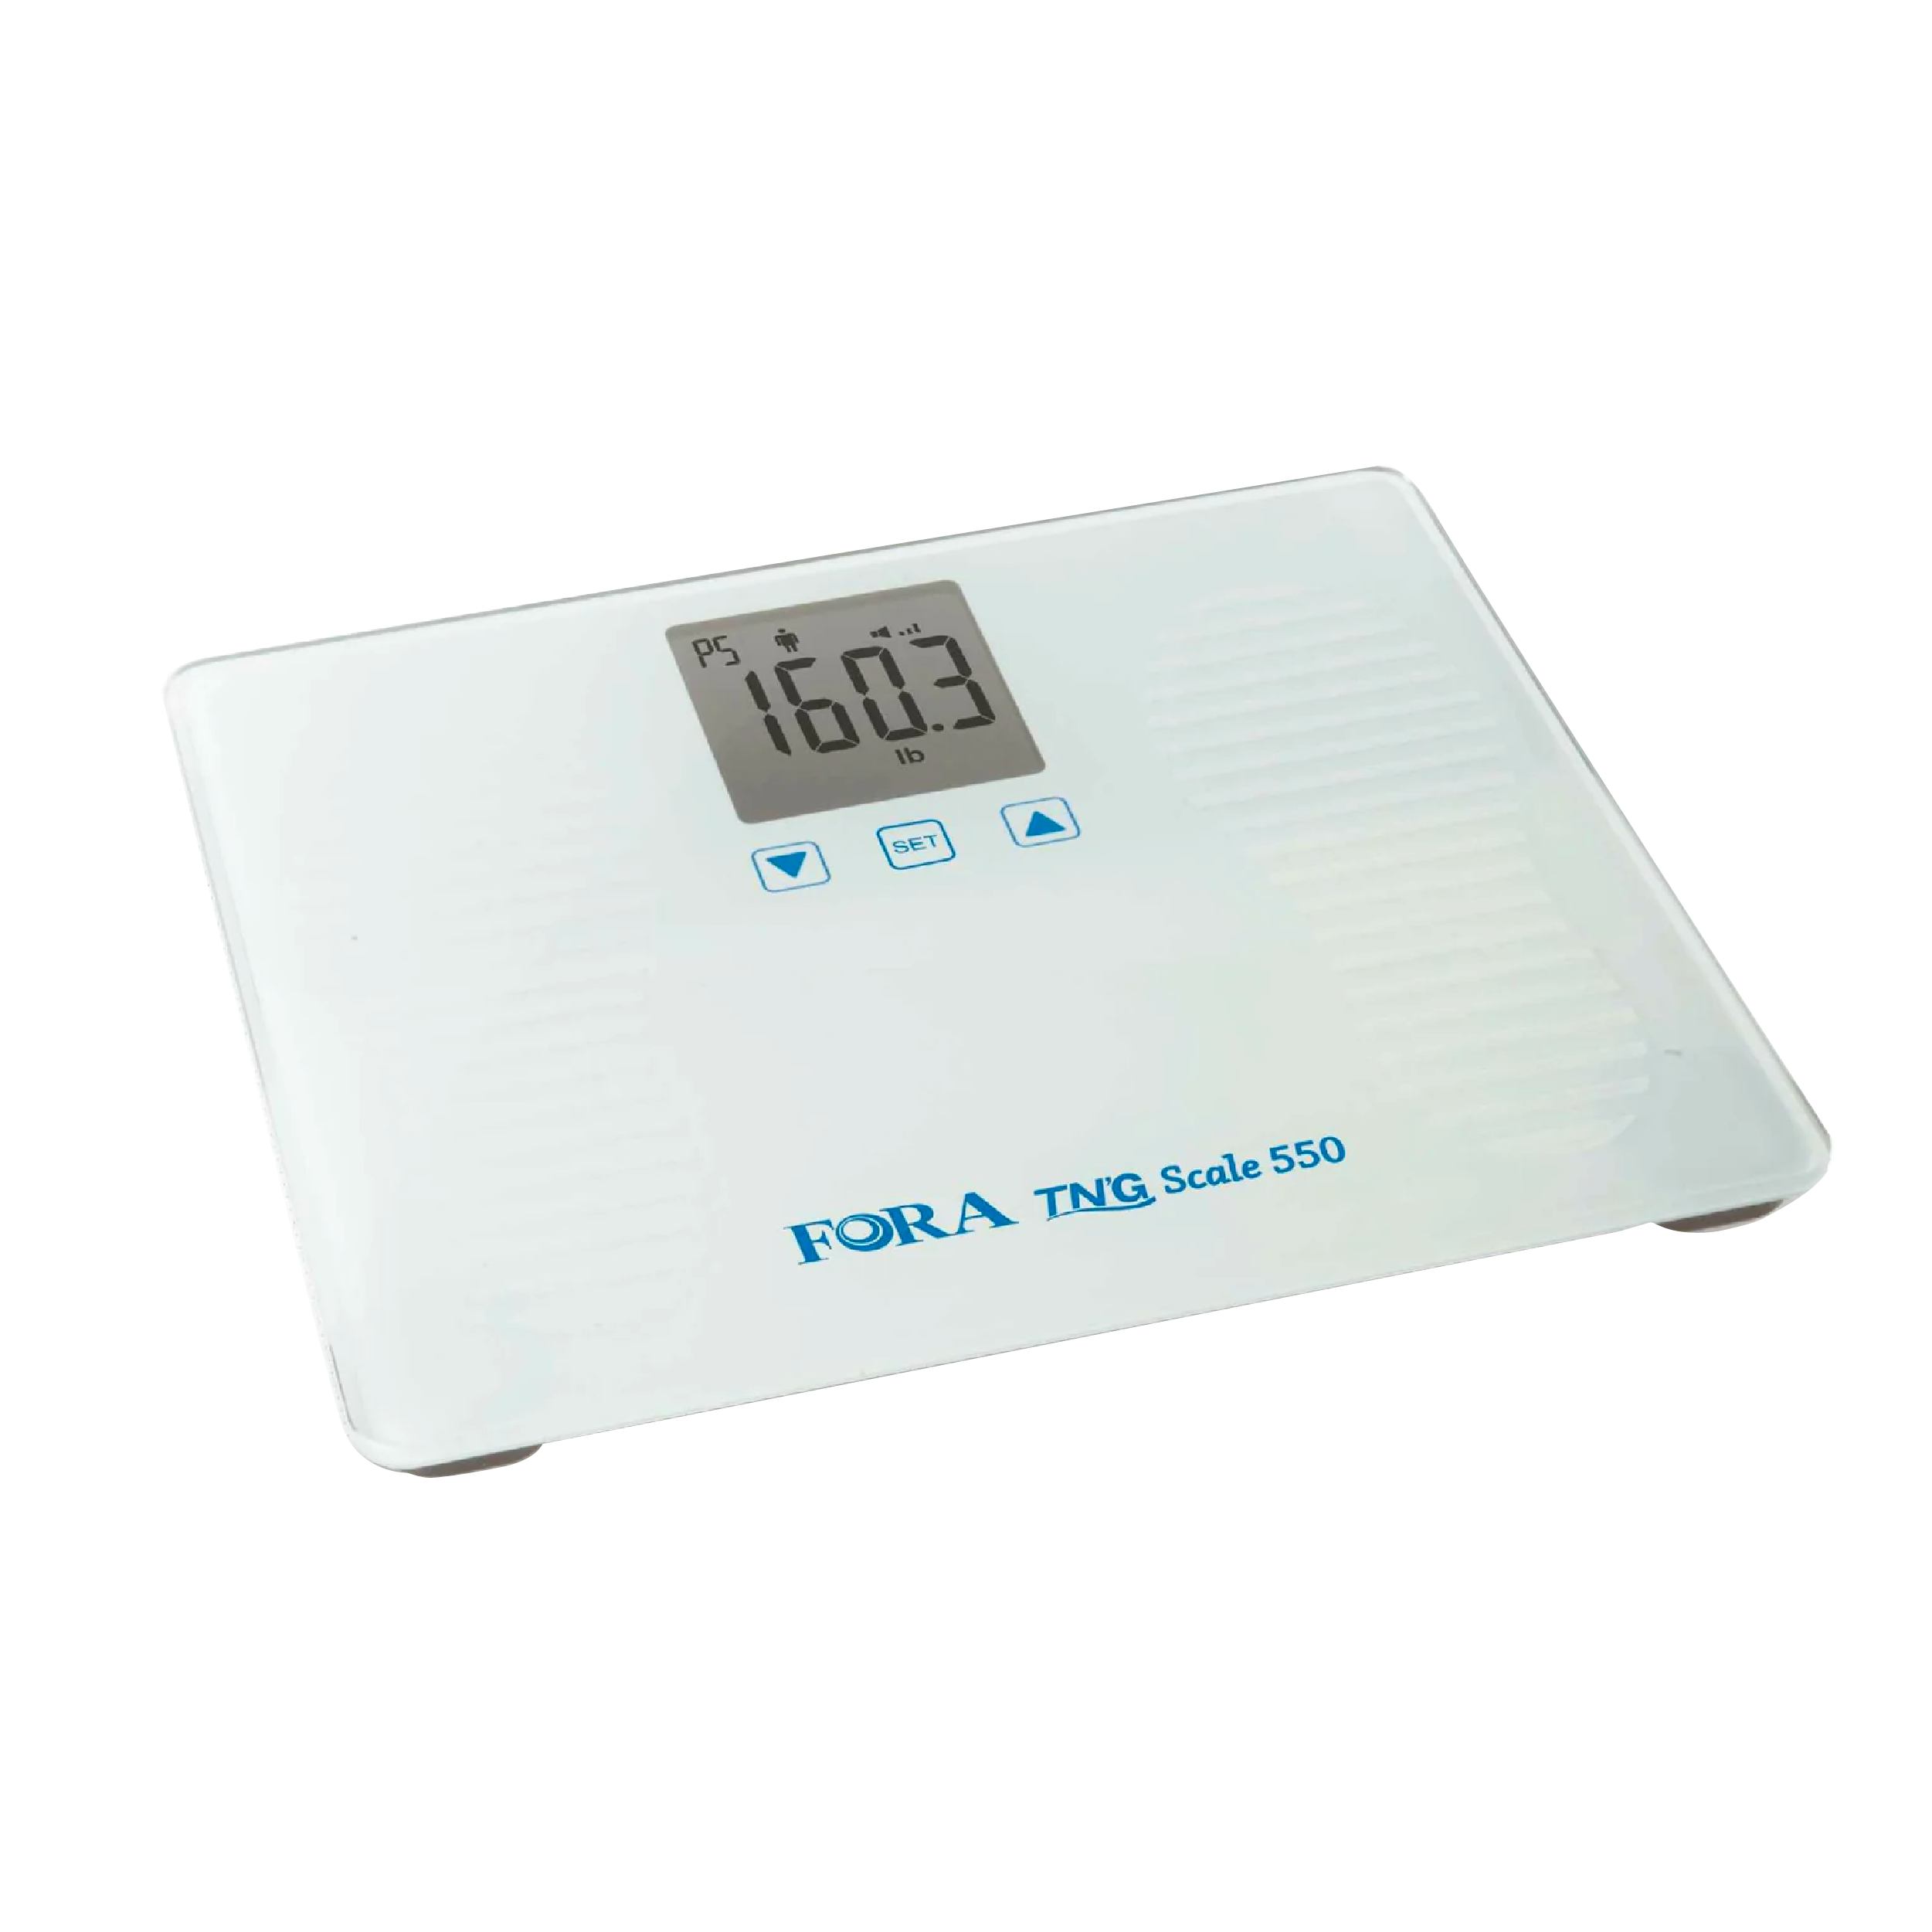 FORA TN'G W550 Bluetooth Weight Scale with Talking Function (Measure Up to 550 lb)